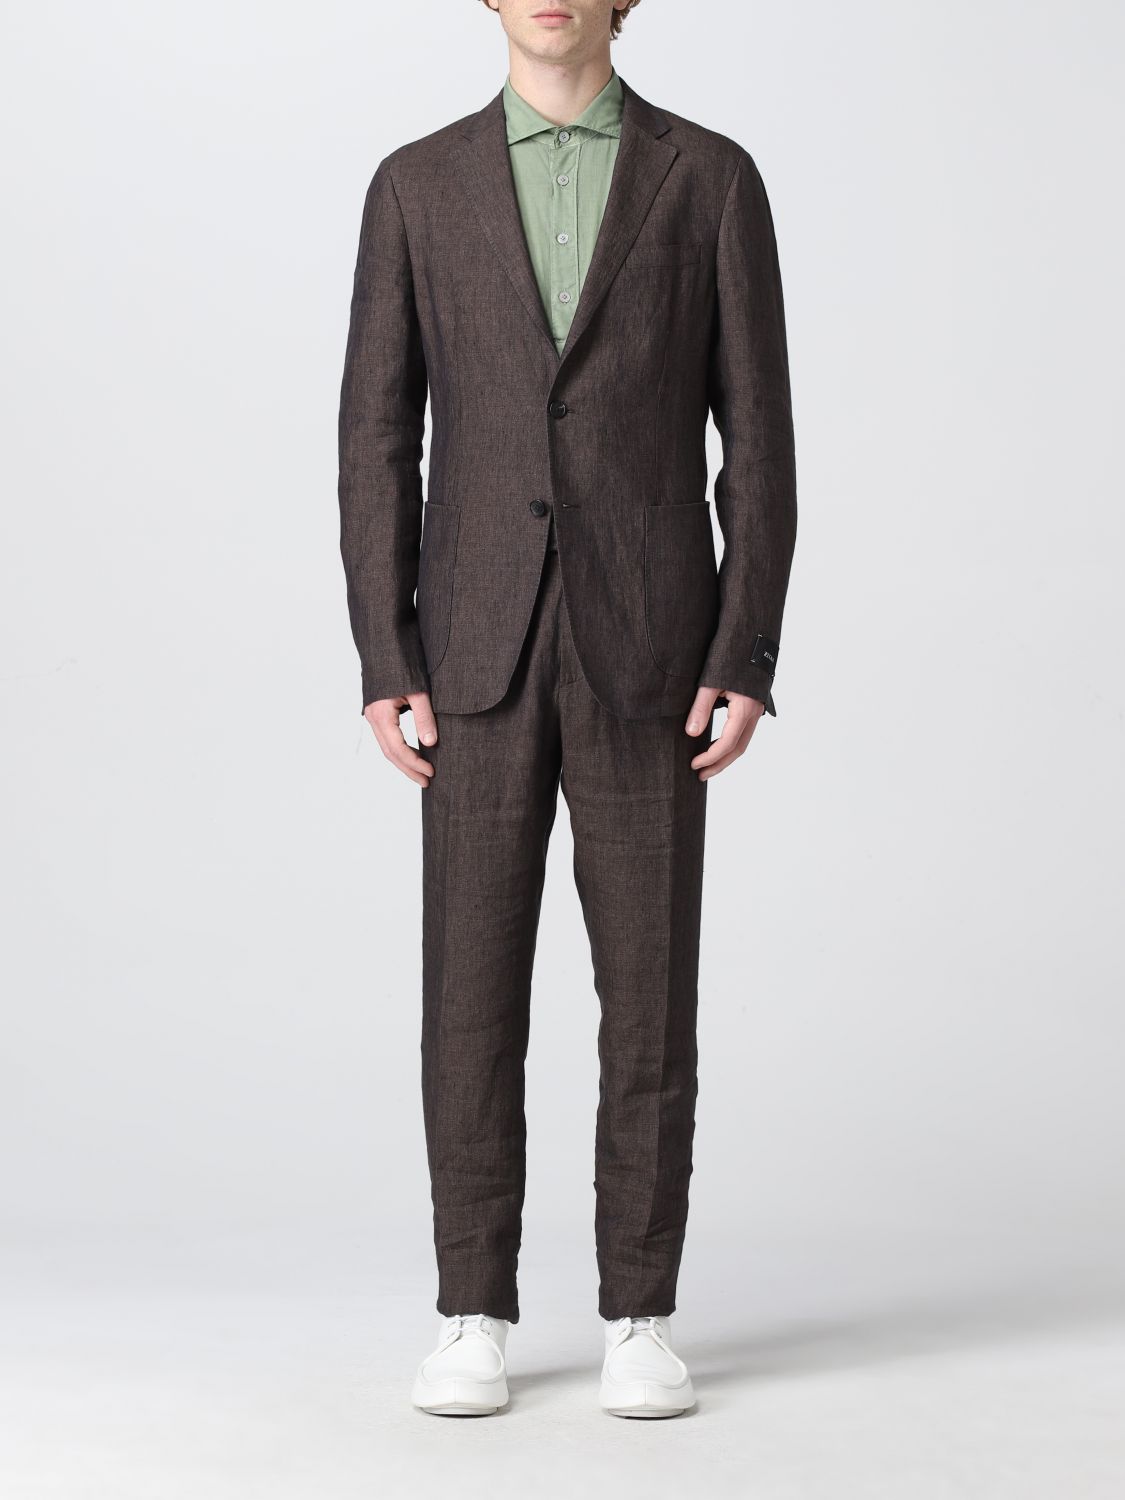 Z ZEGNA: suit for man - Brown | Z Zegna suit 3737032XNMG8 online on ...